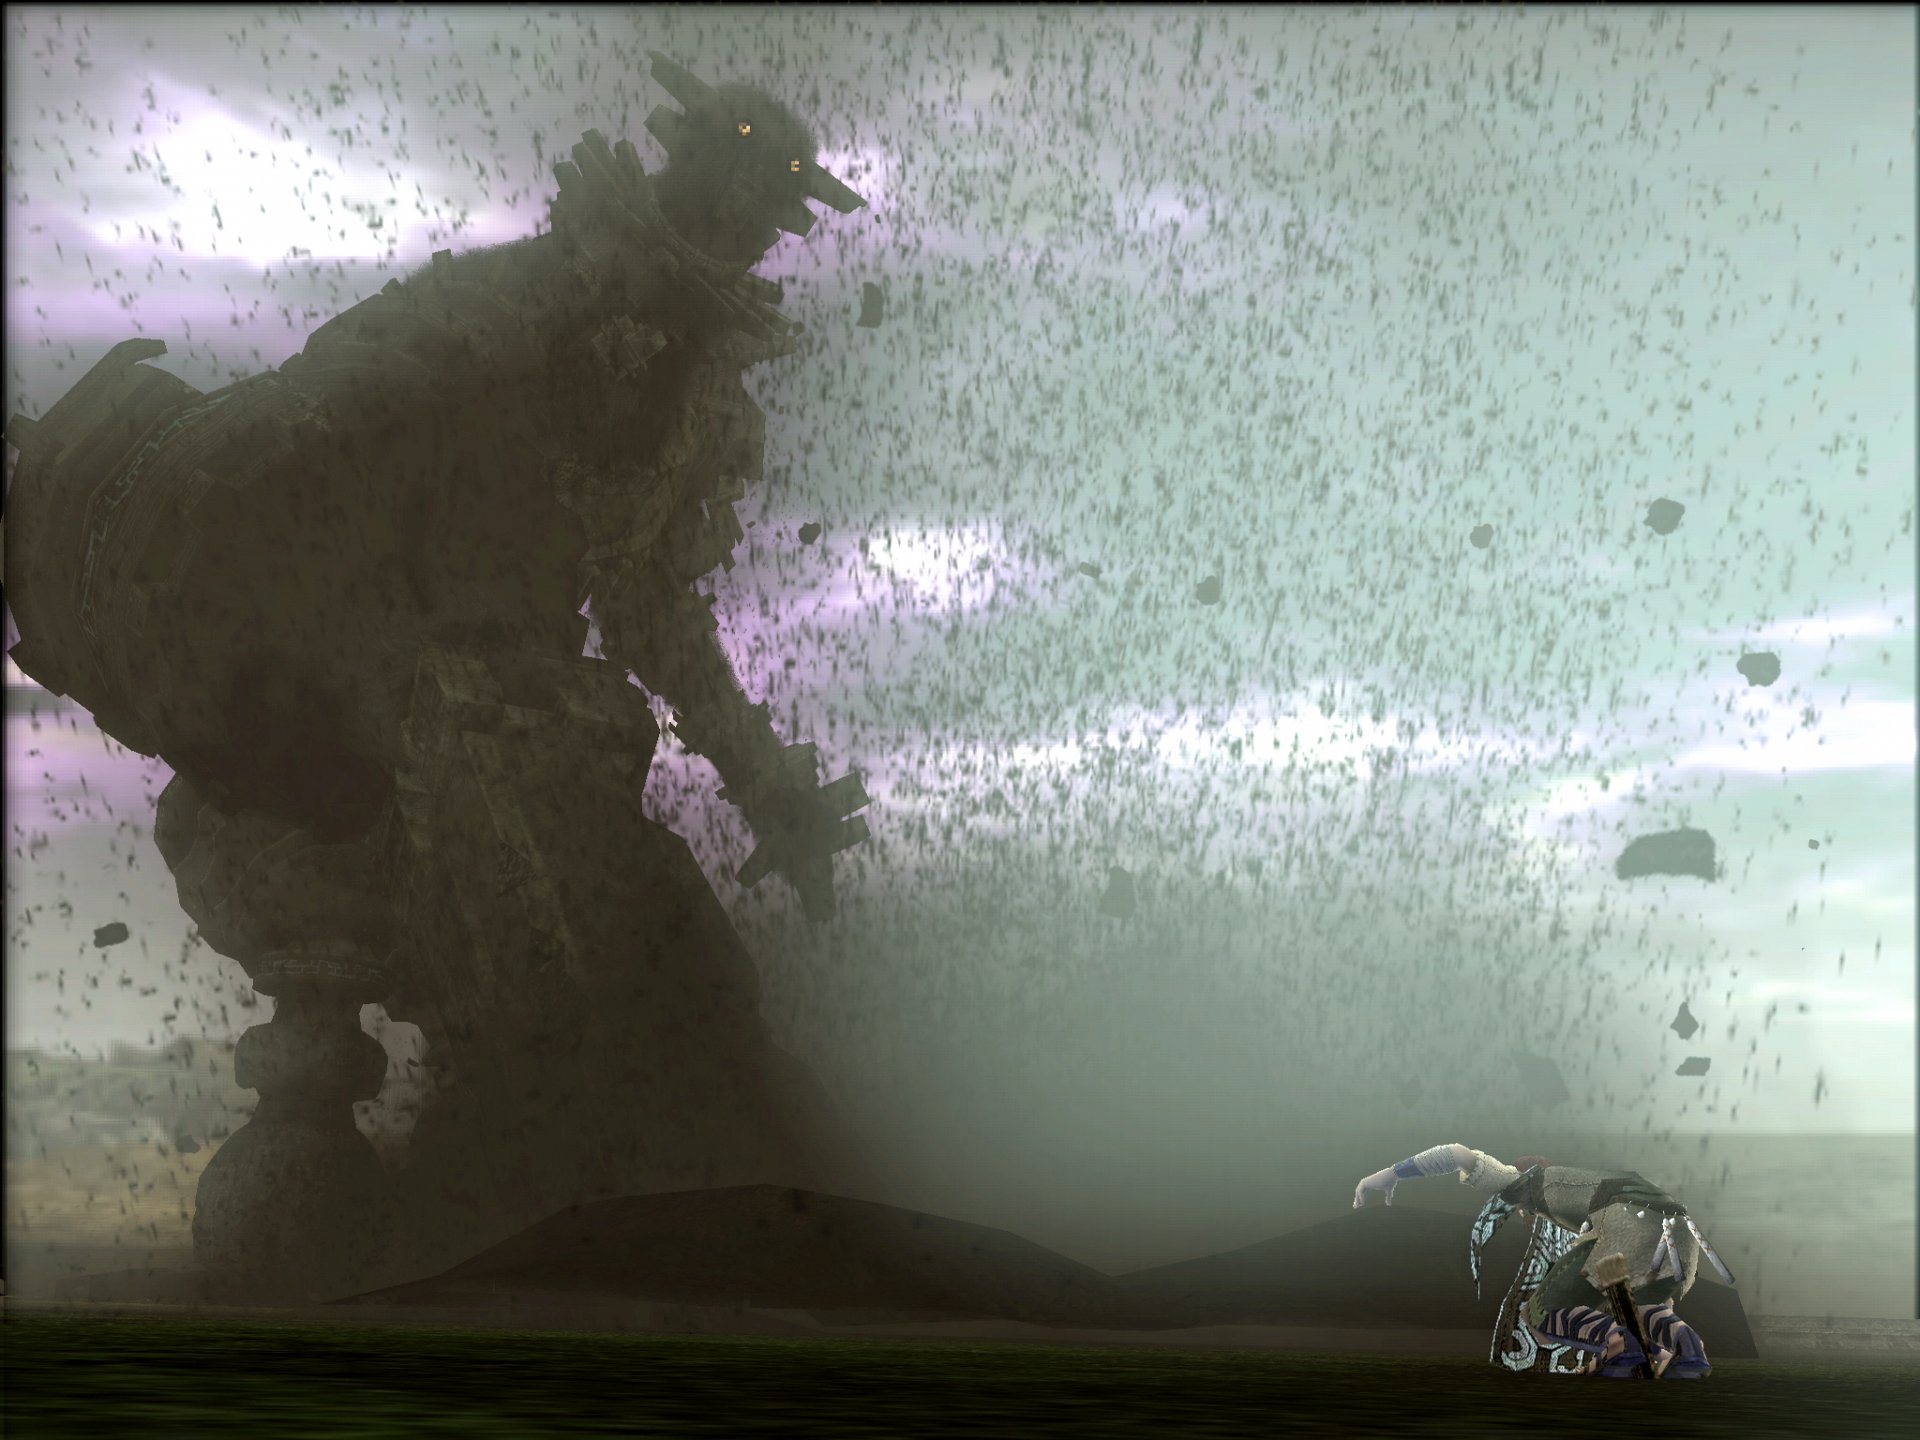 shadow of the colossus pc background hd